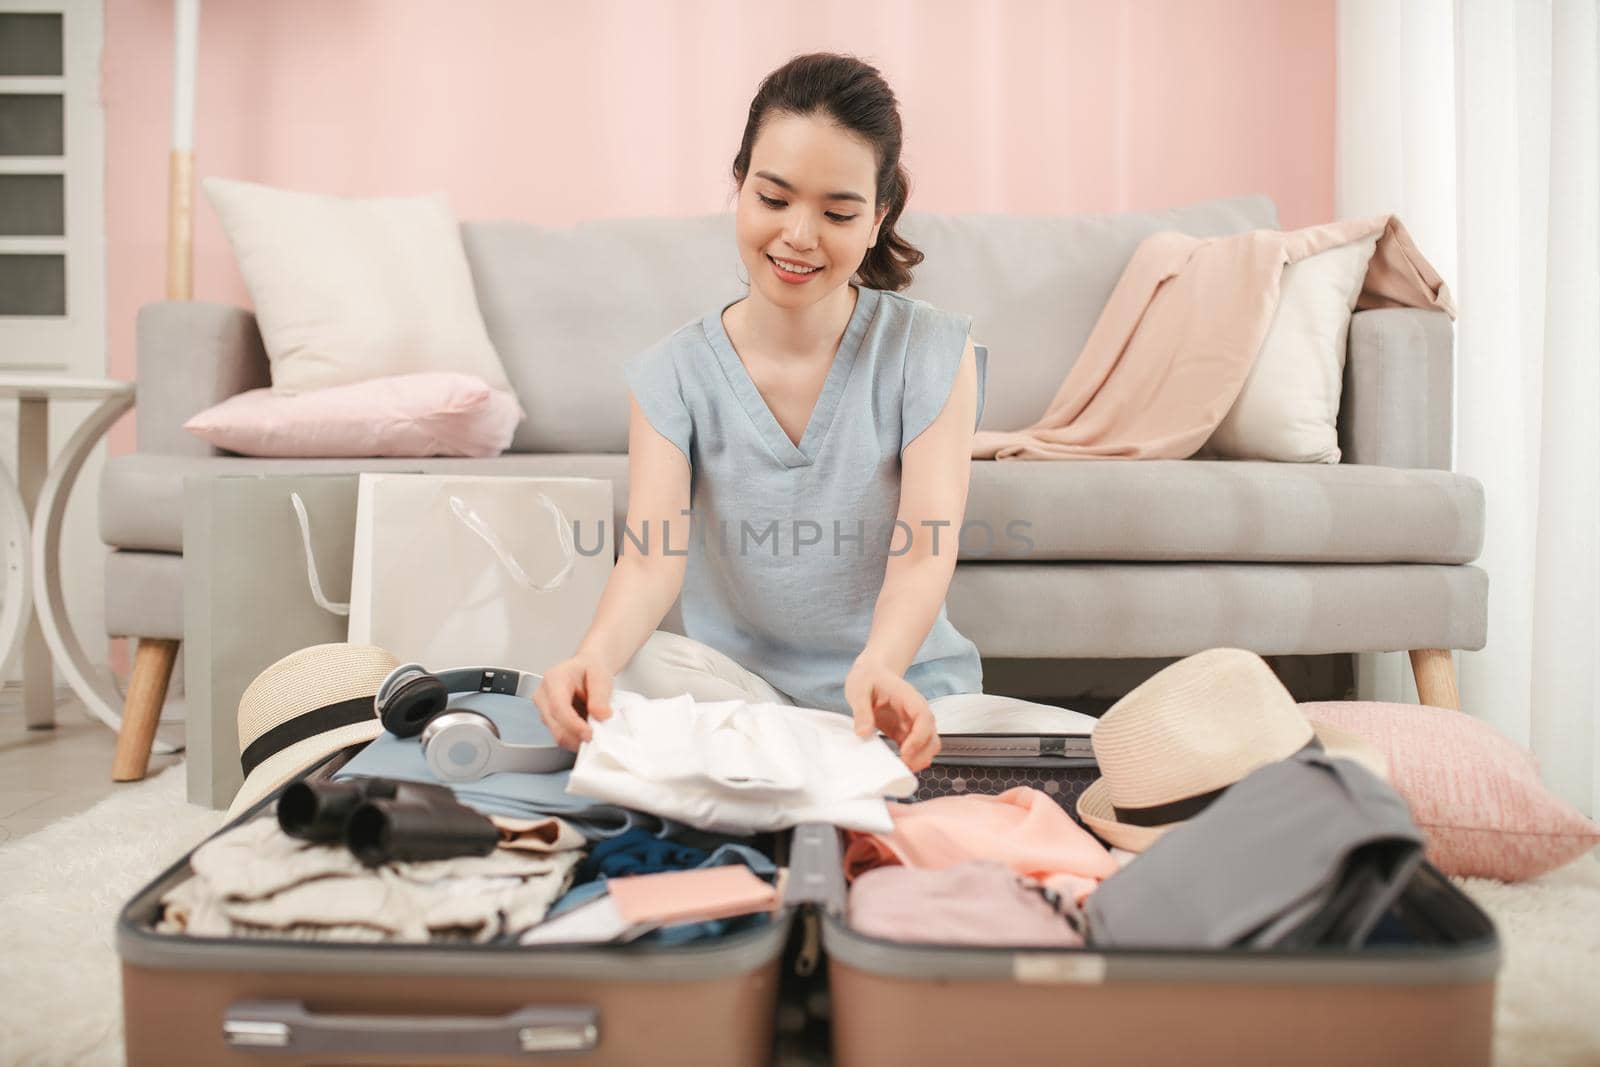 Beautiful woman packing her suitcase in living room